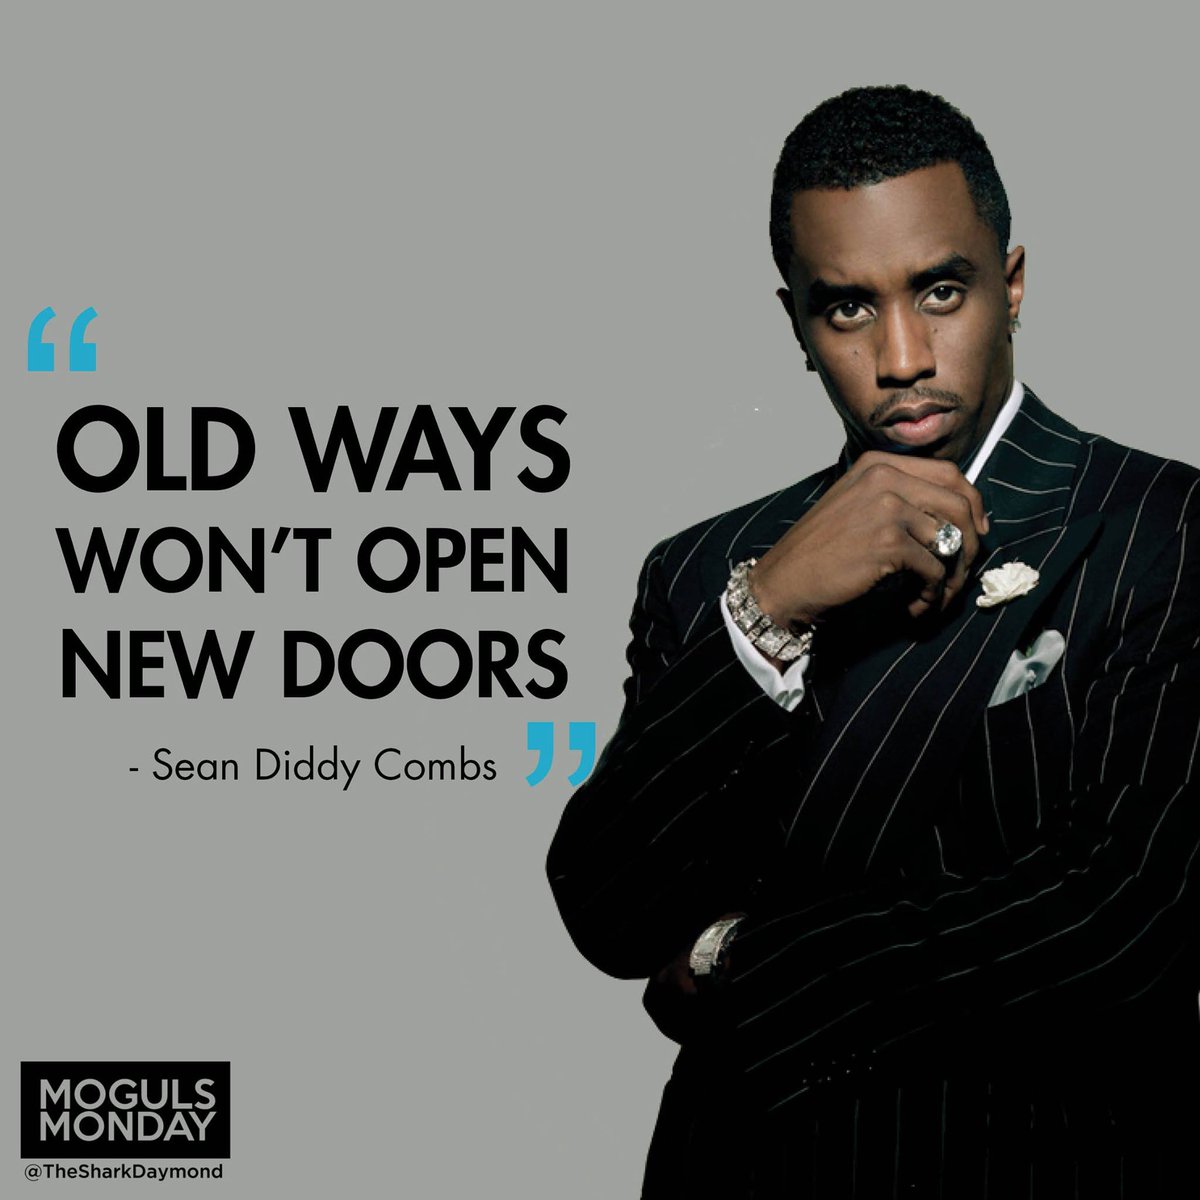 RT @TheSharkDaymond: Couldn’t have said it any better. @iamdiddy #MogulsMonday https://t.co/zvSy1FtorL